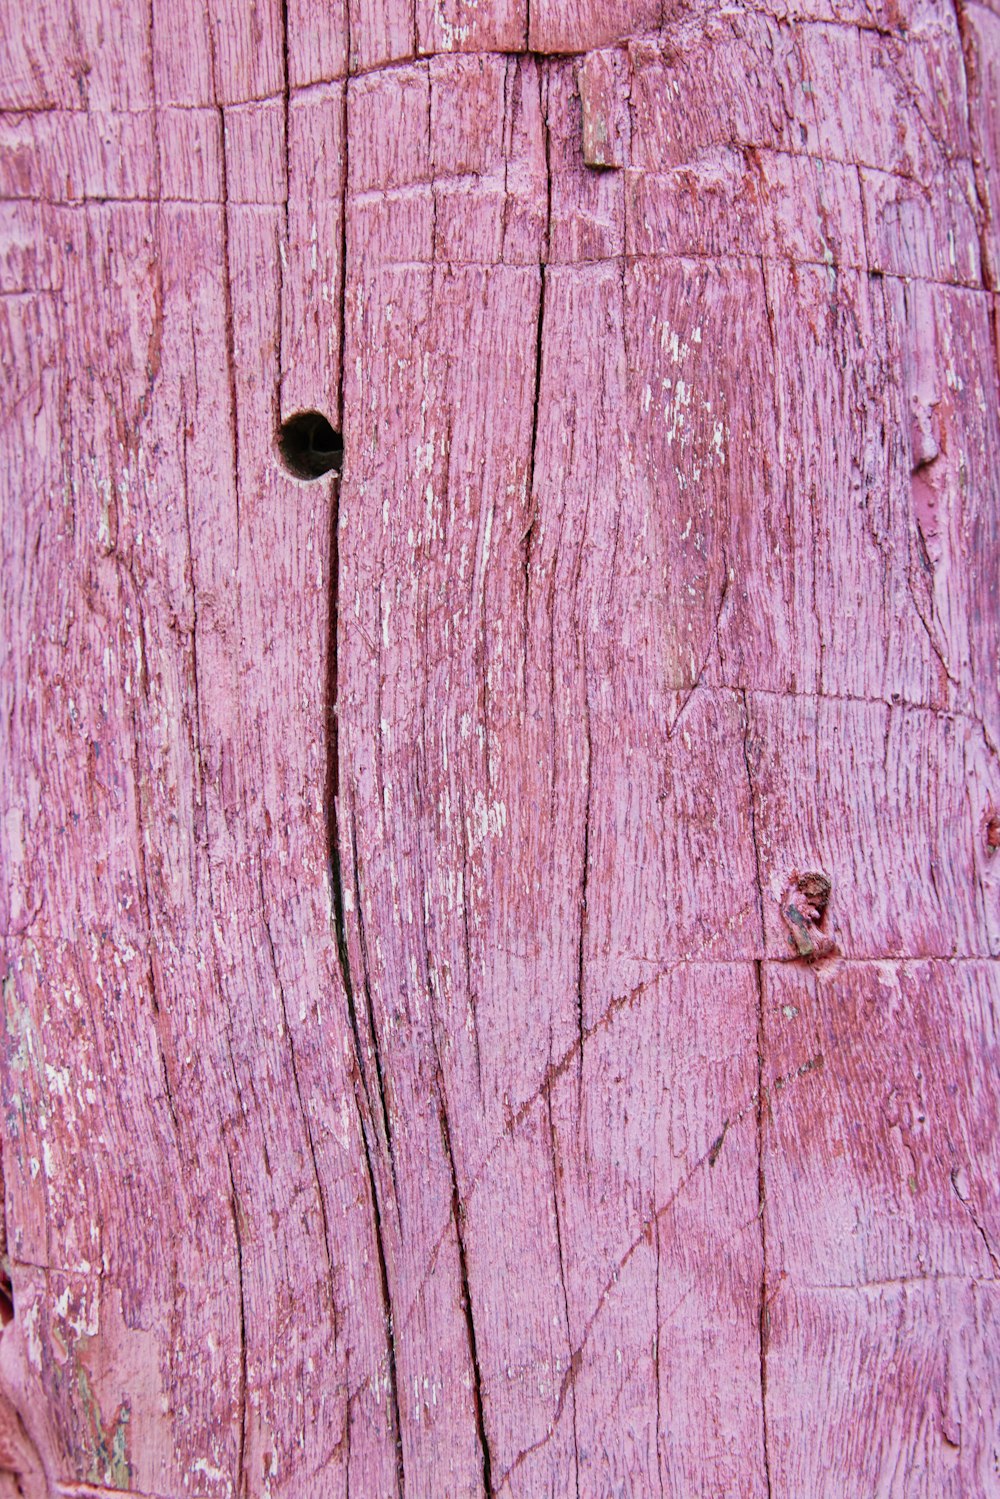 a close up of a piece of wood with holes in it